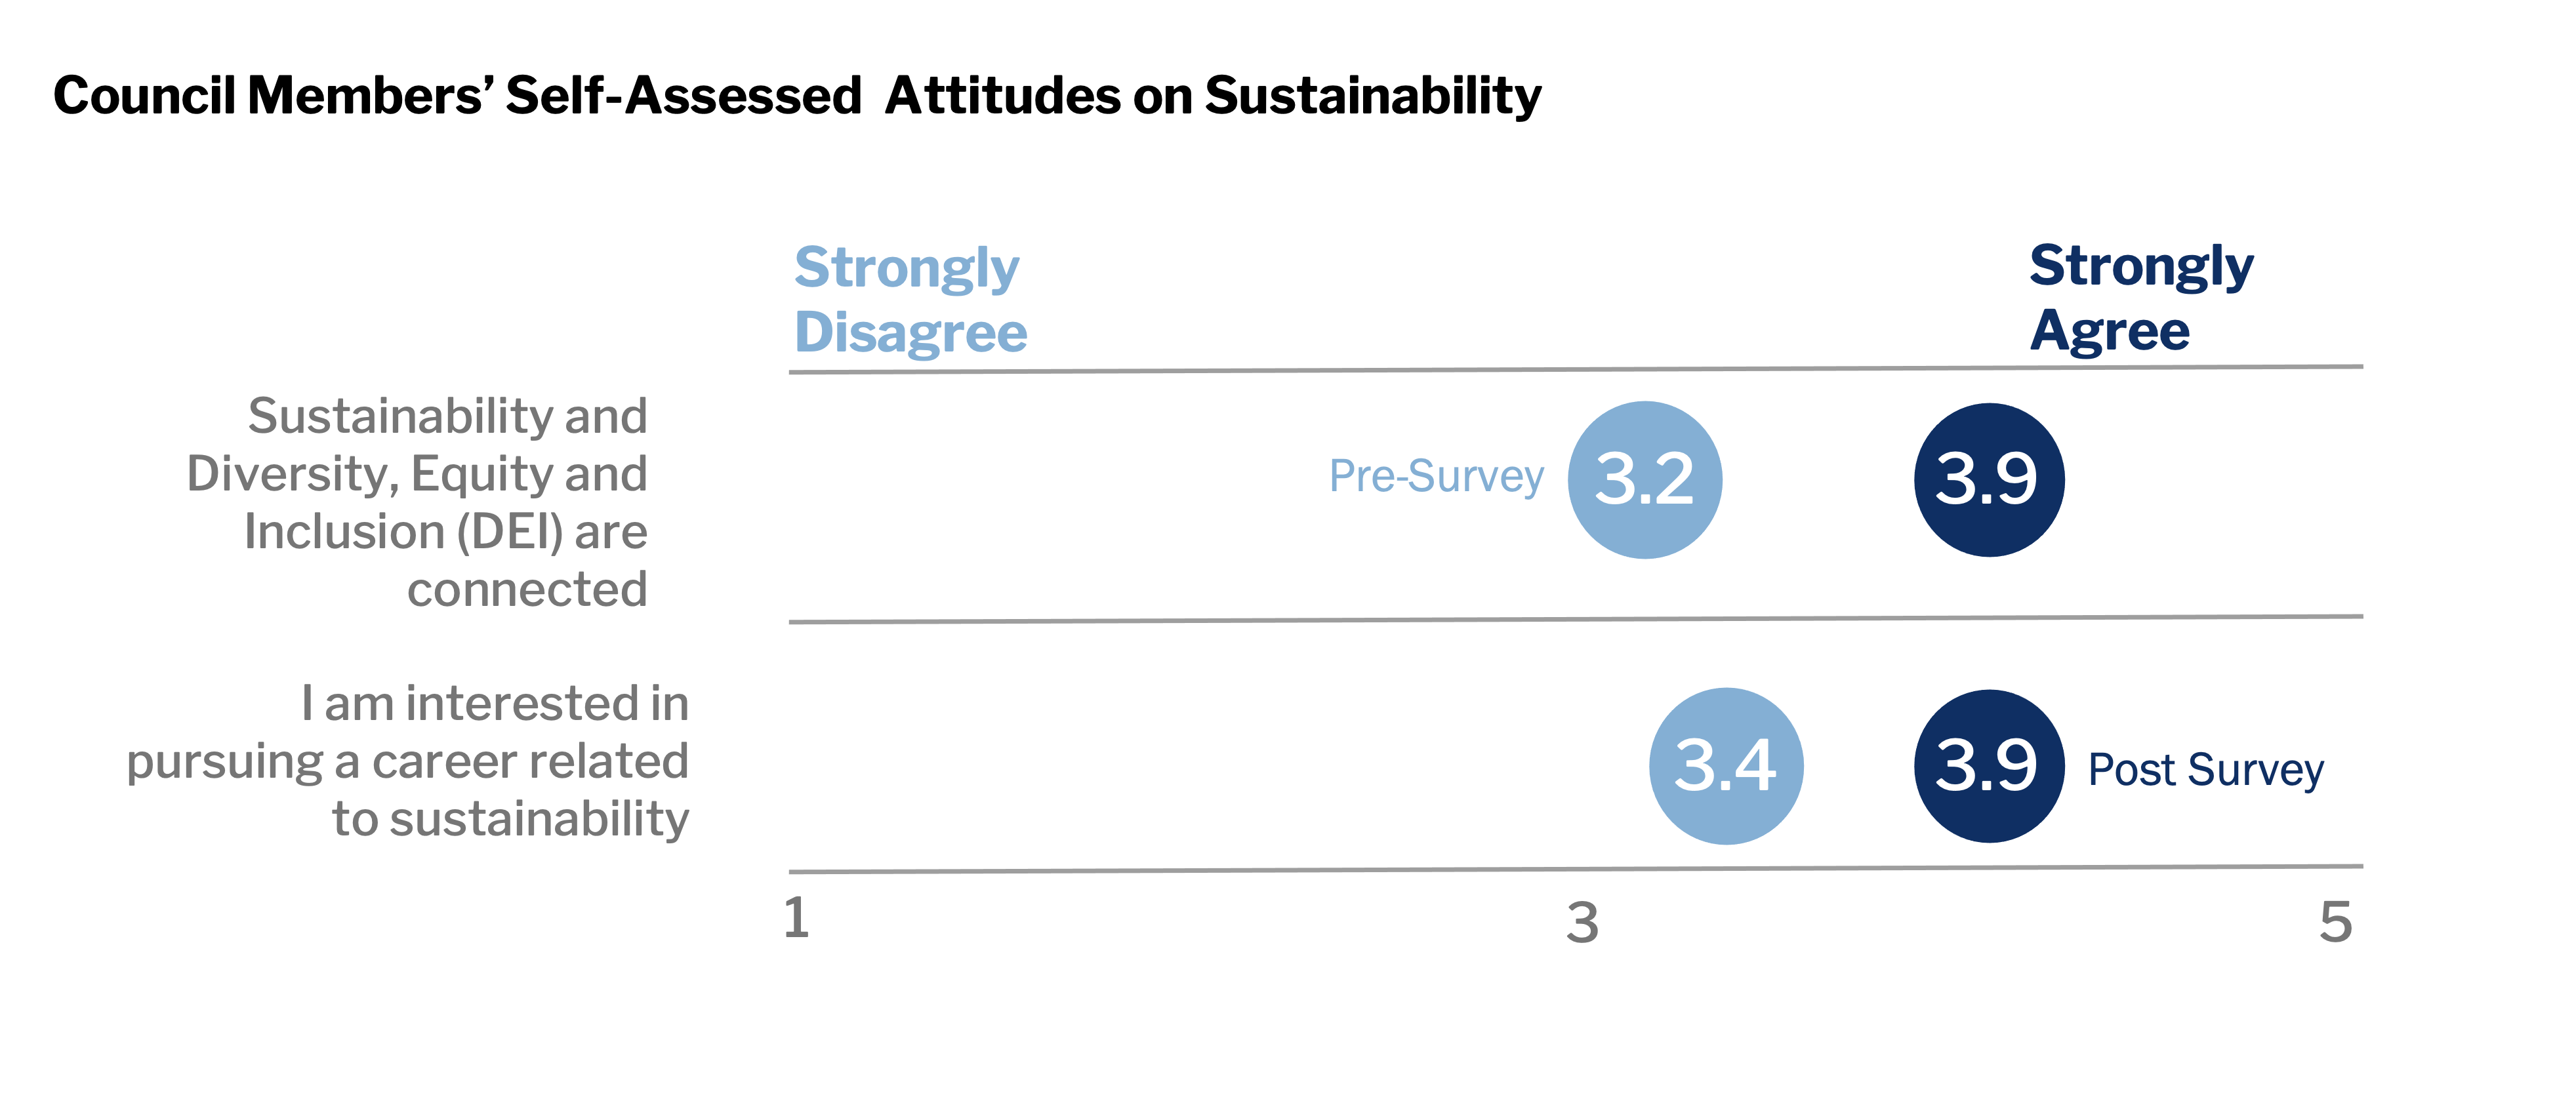 Graph shows students' self-reported attitudes on two statements, at the beginning and end of the Youth Sustainability Leadership Council's pilot year: "Sustainability and Diversity, Equity, and Inclusion are connected" (increased from 3.2 pre-survey to 3.9 post survey) and "I am interested in pursuing a career related to sustainability (3.4 pre-survey to 3.9 post-survey).